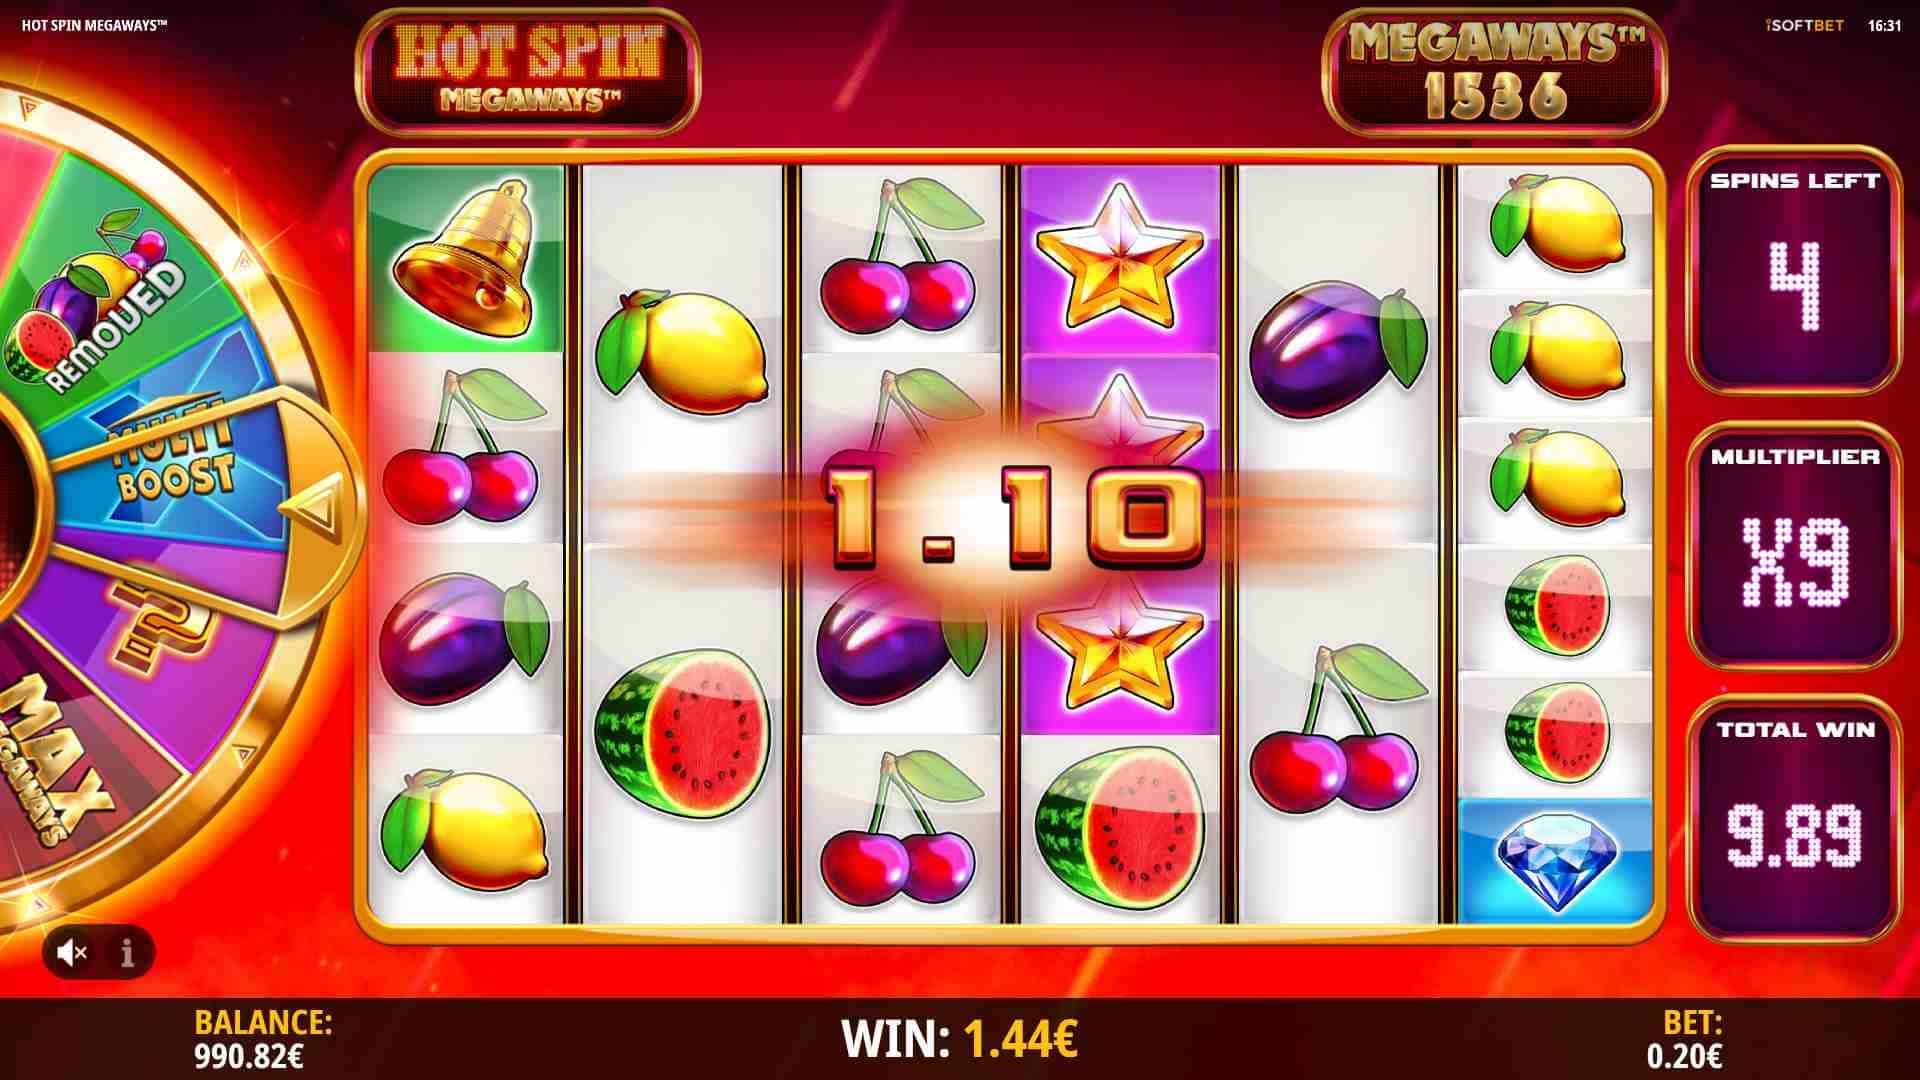 Hot Spin Megaways Free Spins